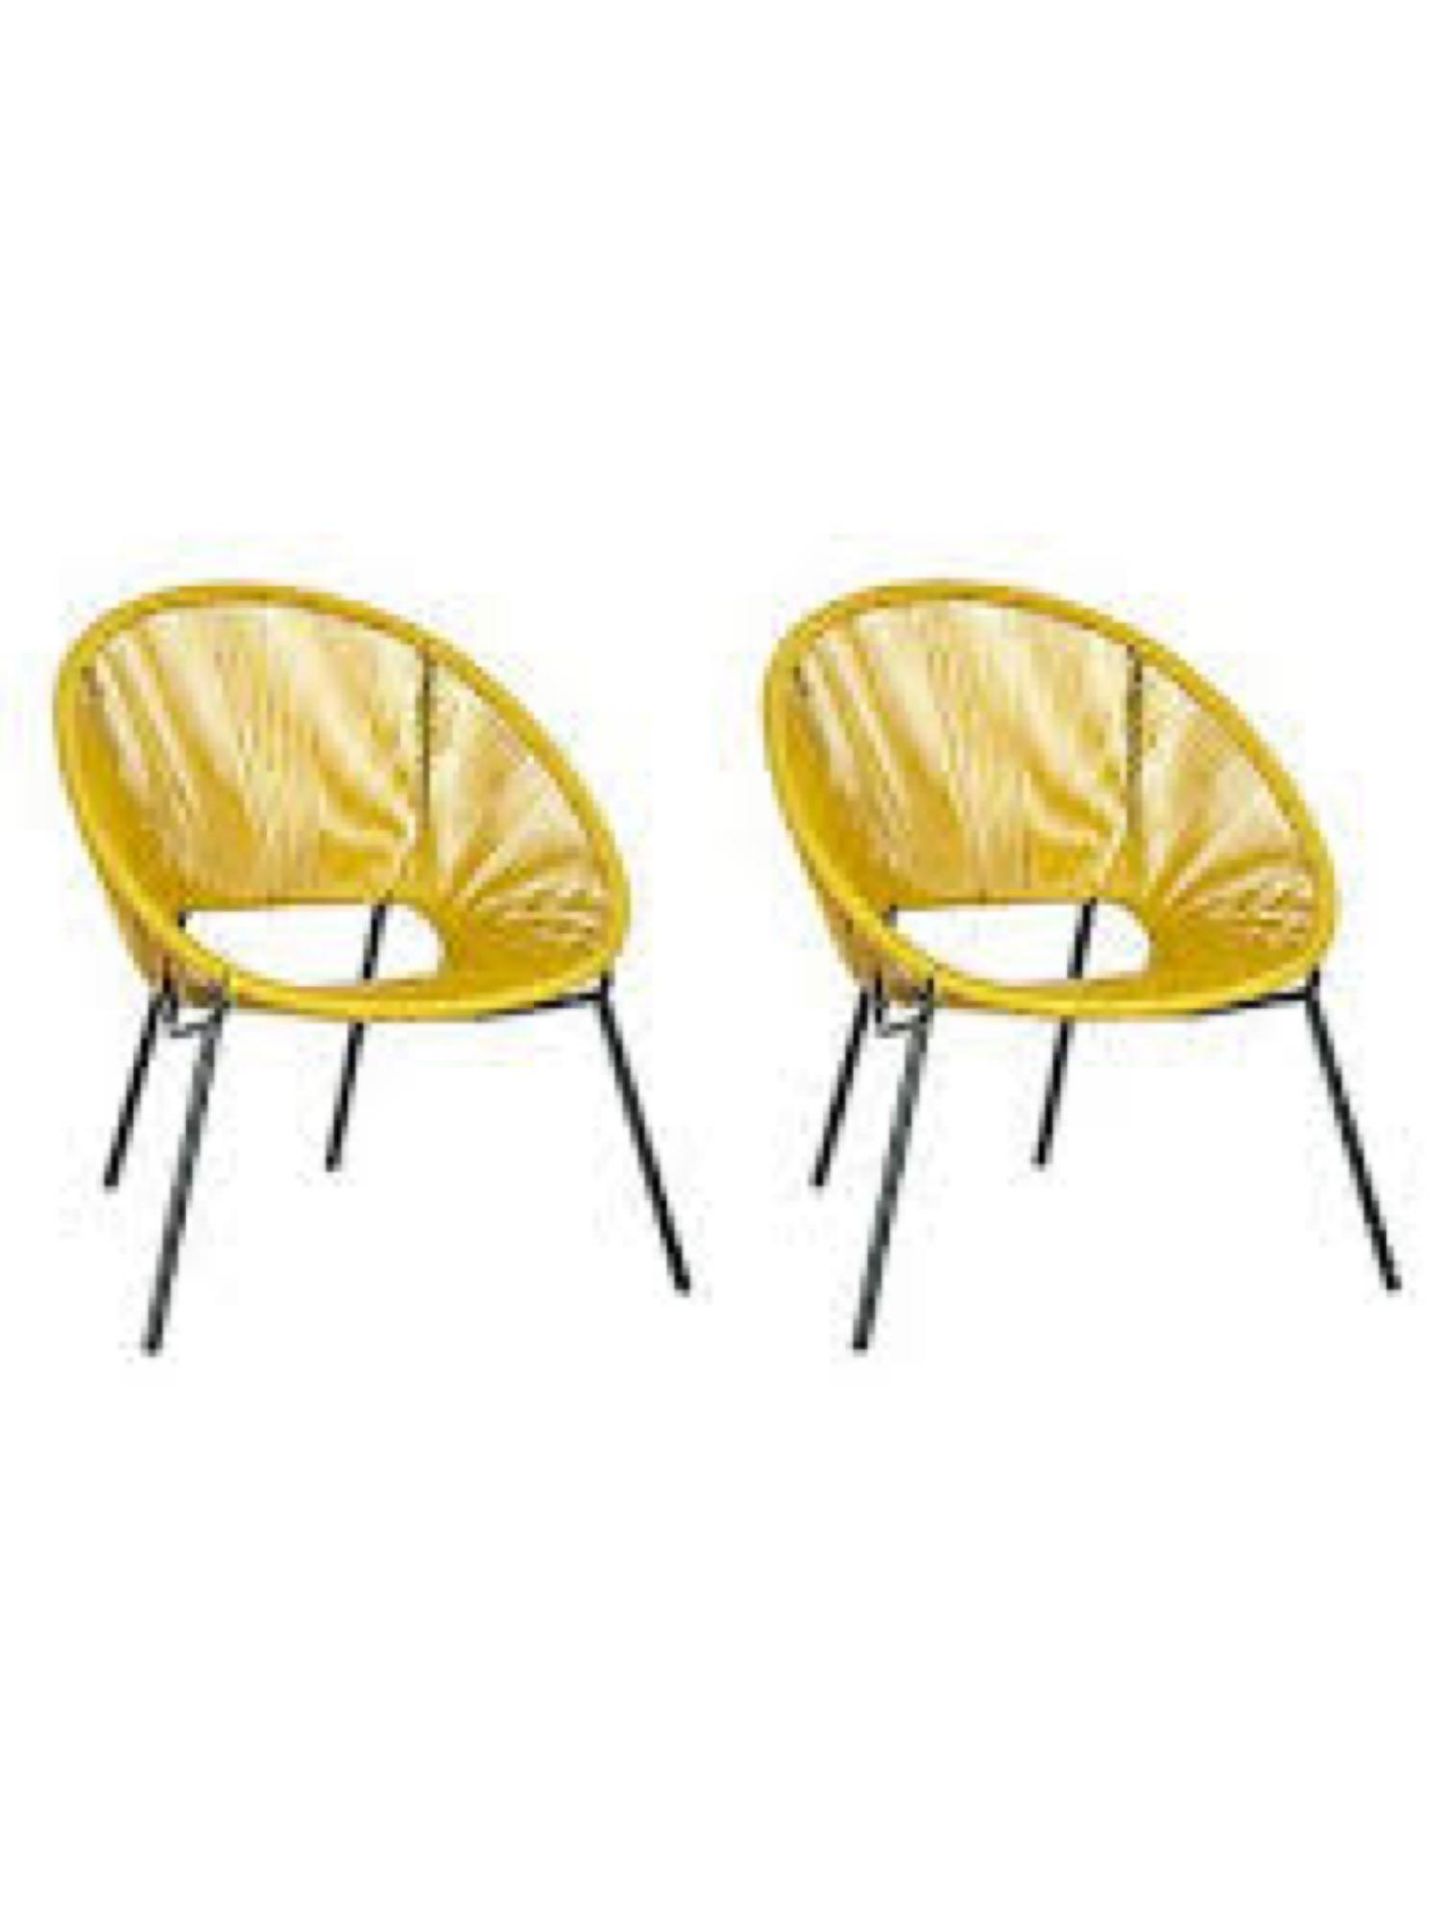 RRP £140 Combined Lot To Contain 2X John Lewis Salsa Garden Chairs In Yellow